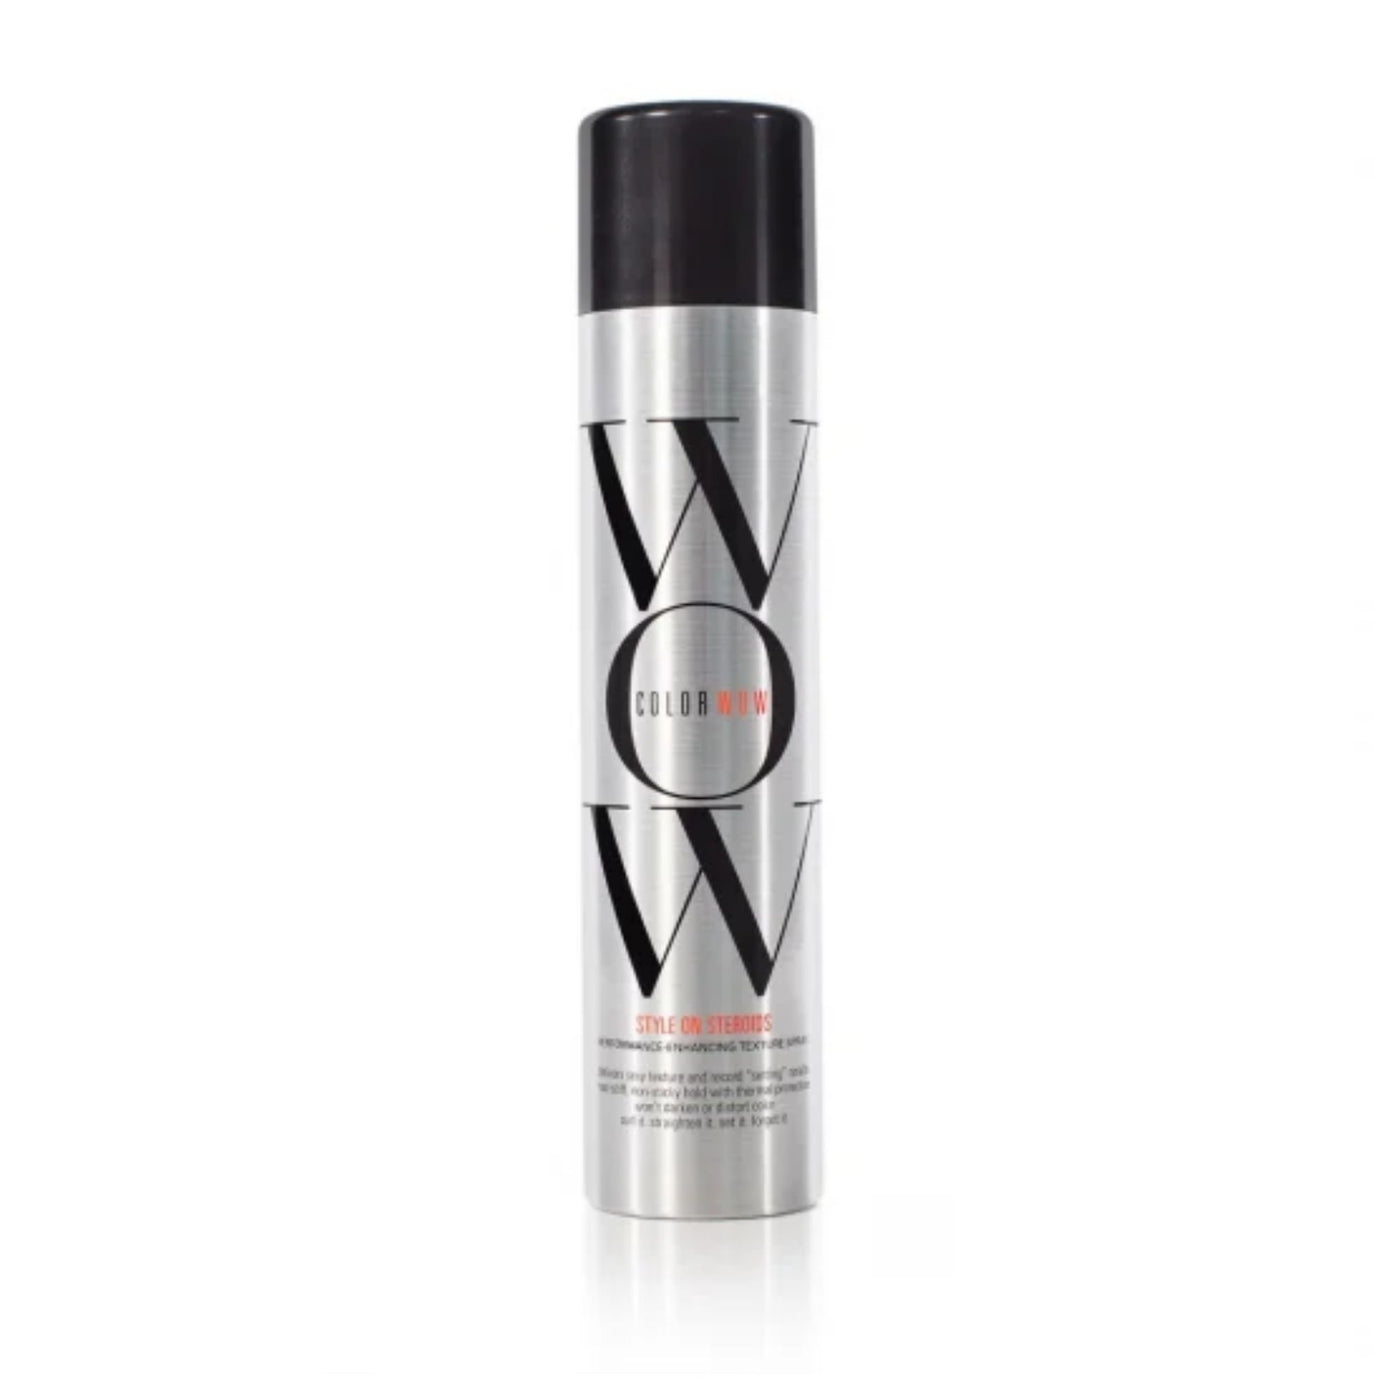 Color Wow - Style on Steroids 262ml